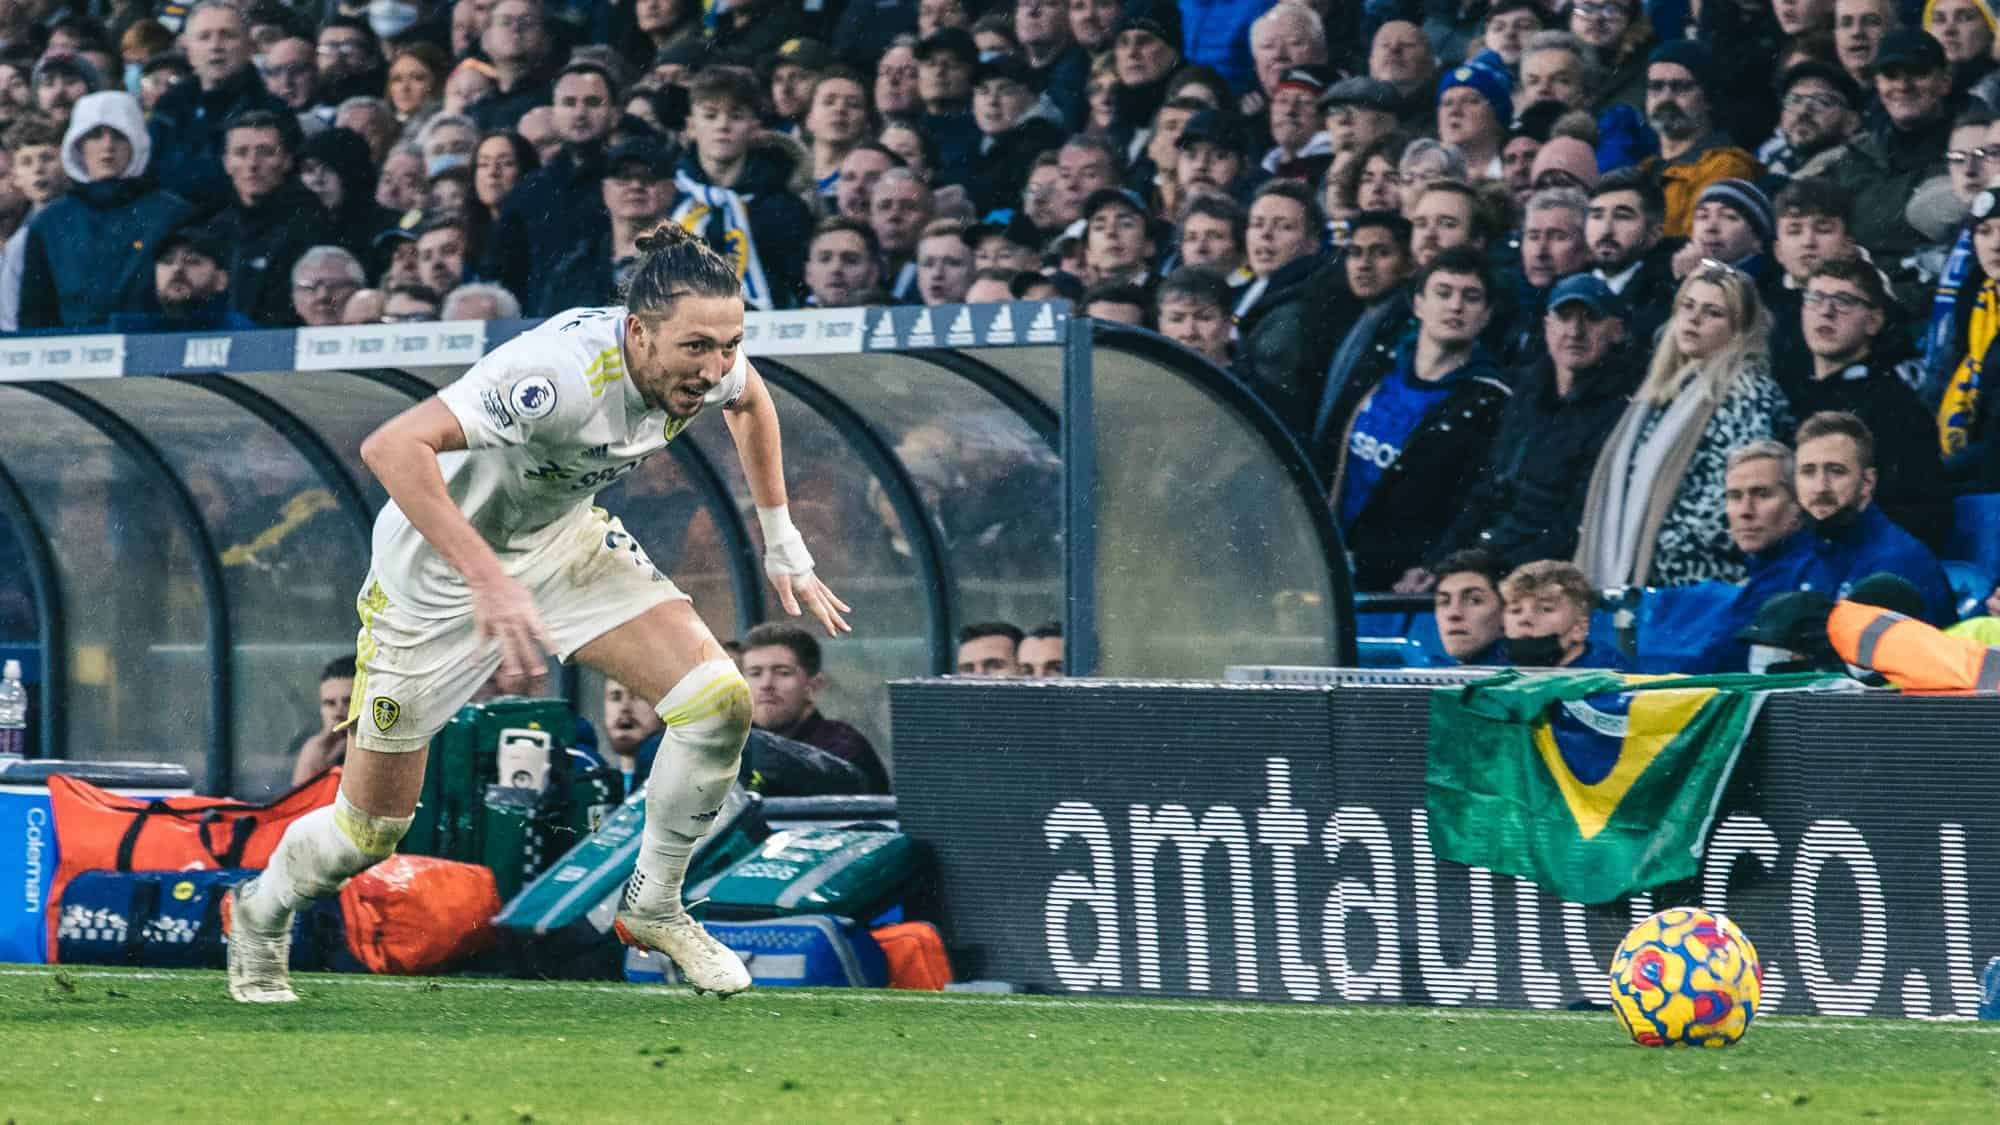 Luke Ayling chasing the ball, with a bandage on his left wrist, as if when he catches it he's going to punch it